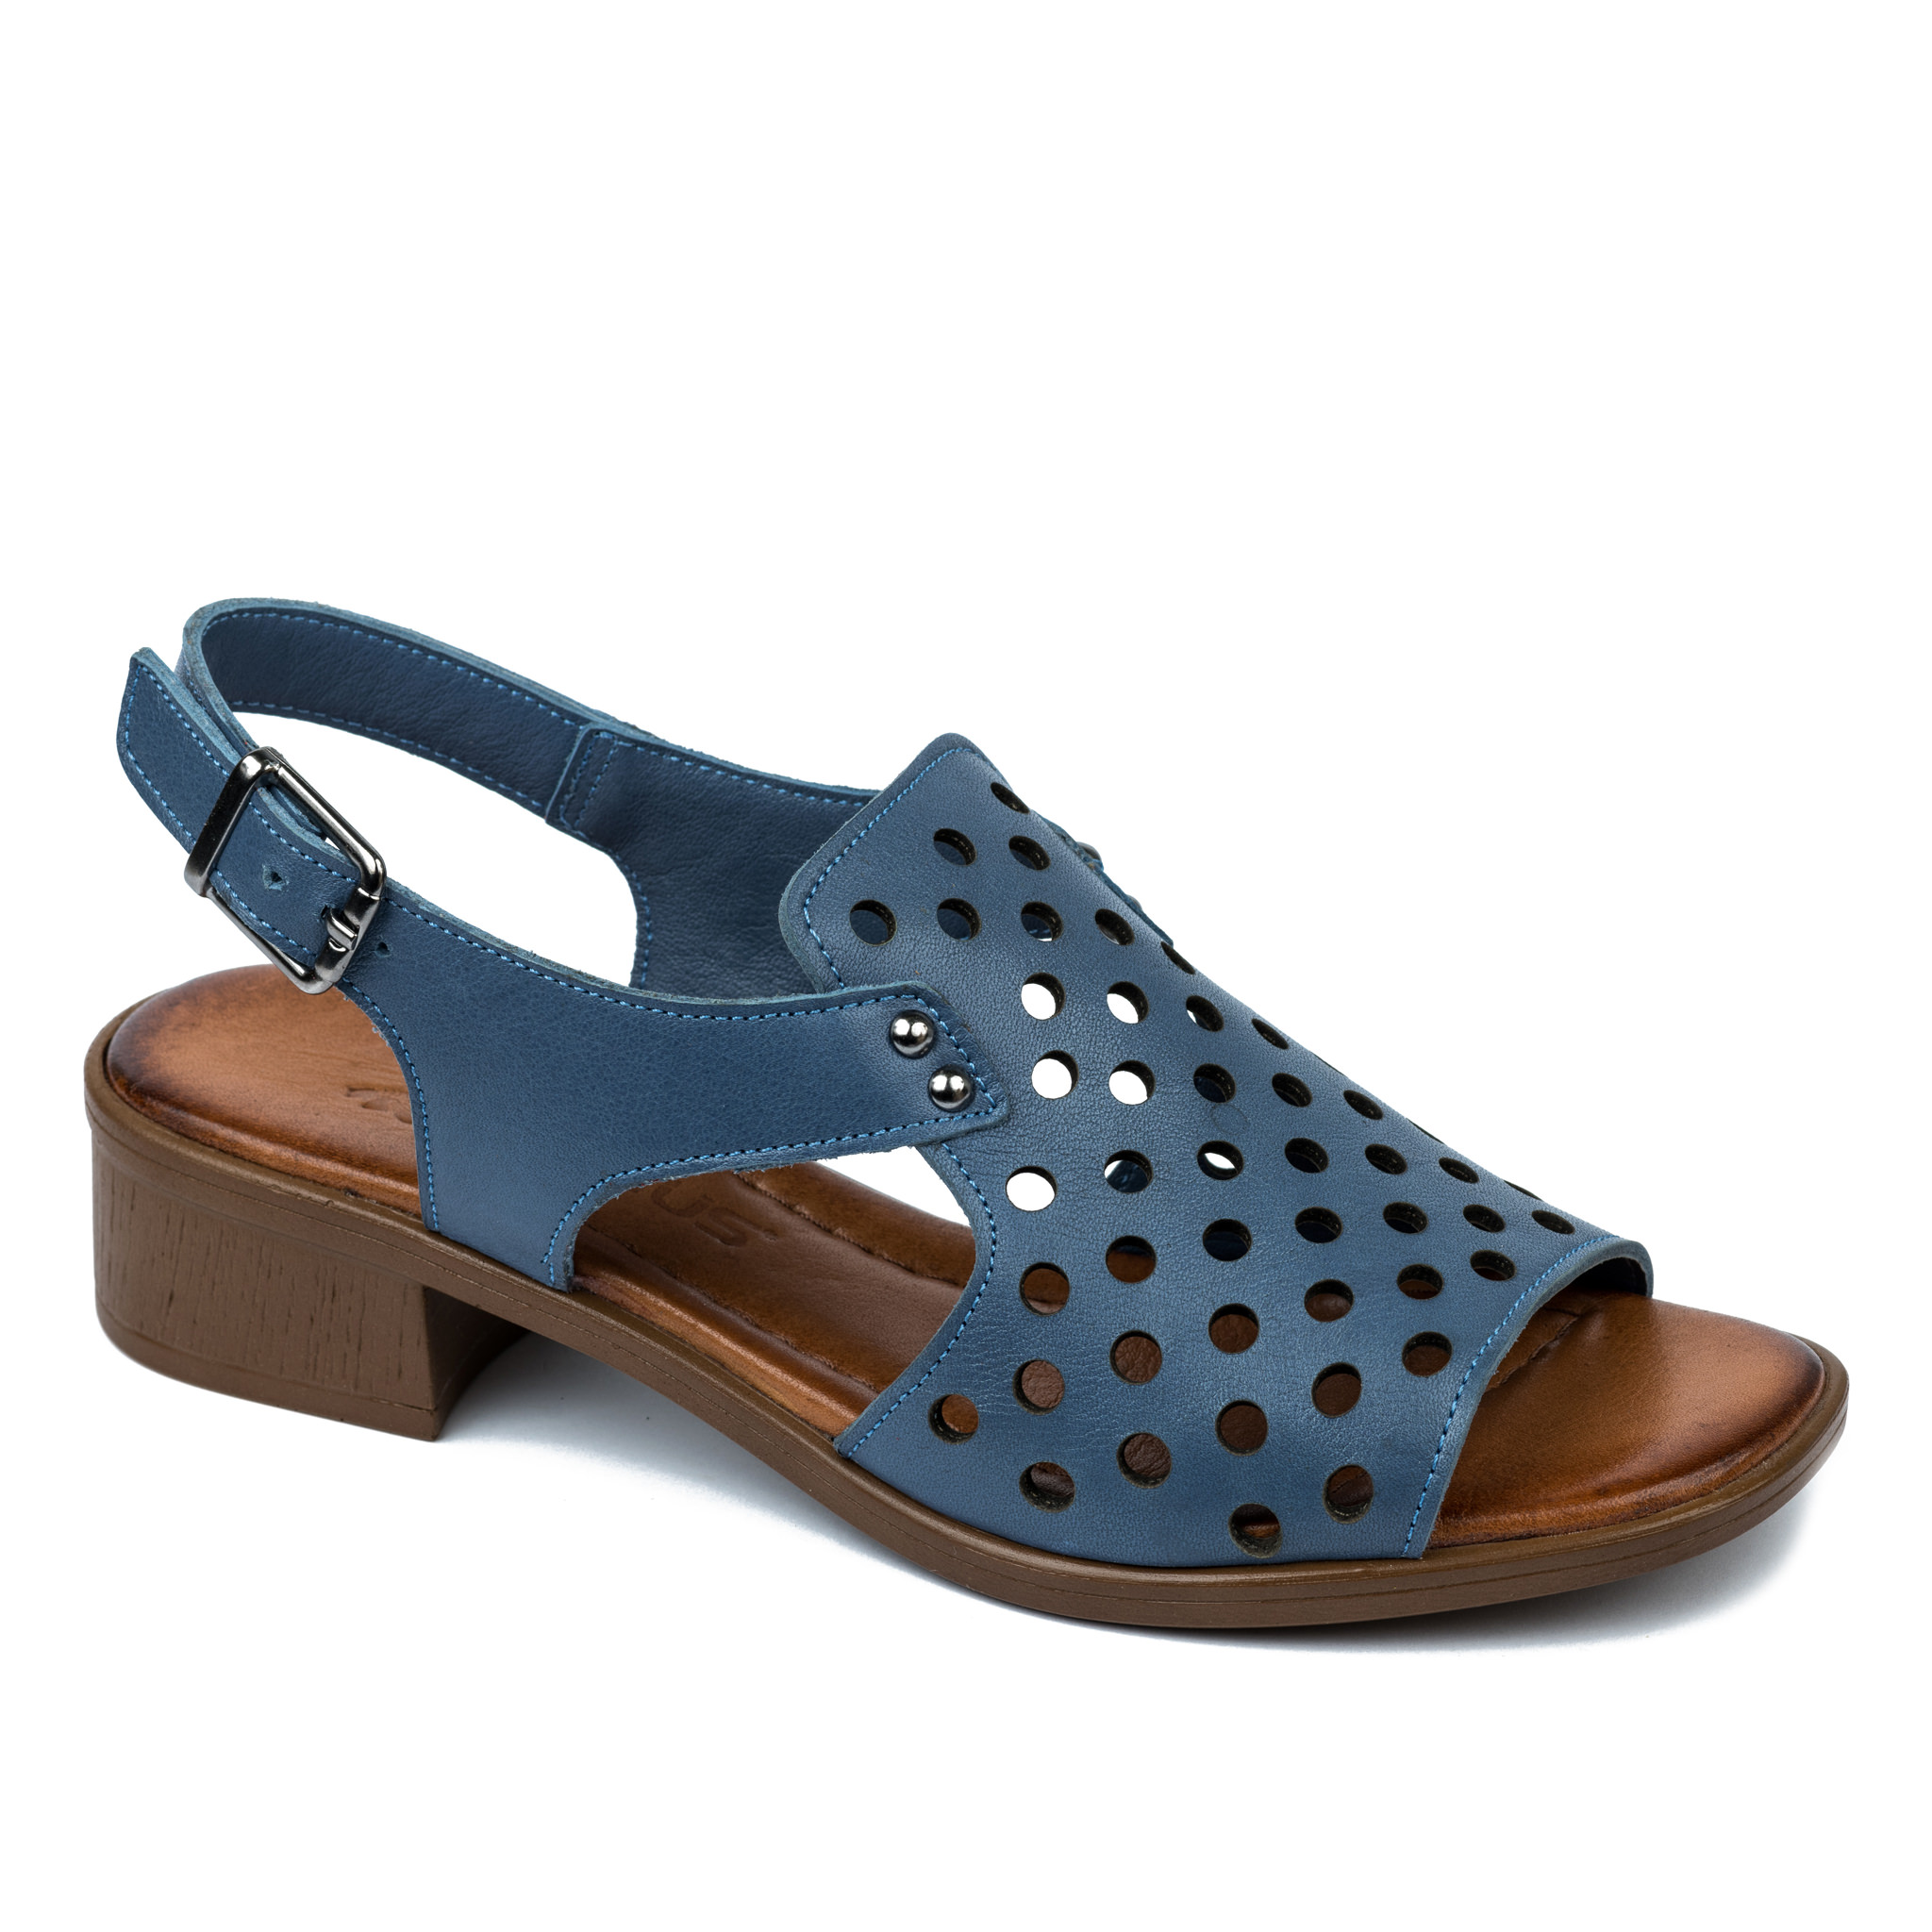 Leather sandals A473 - BLUE